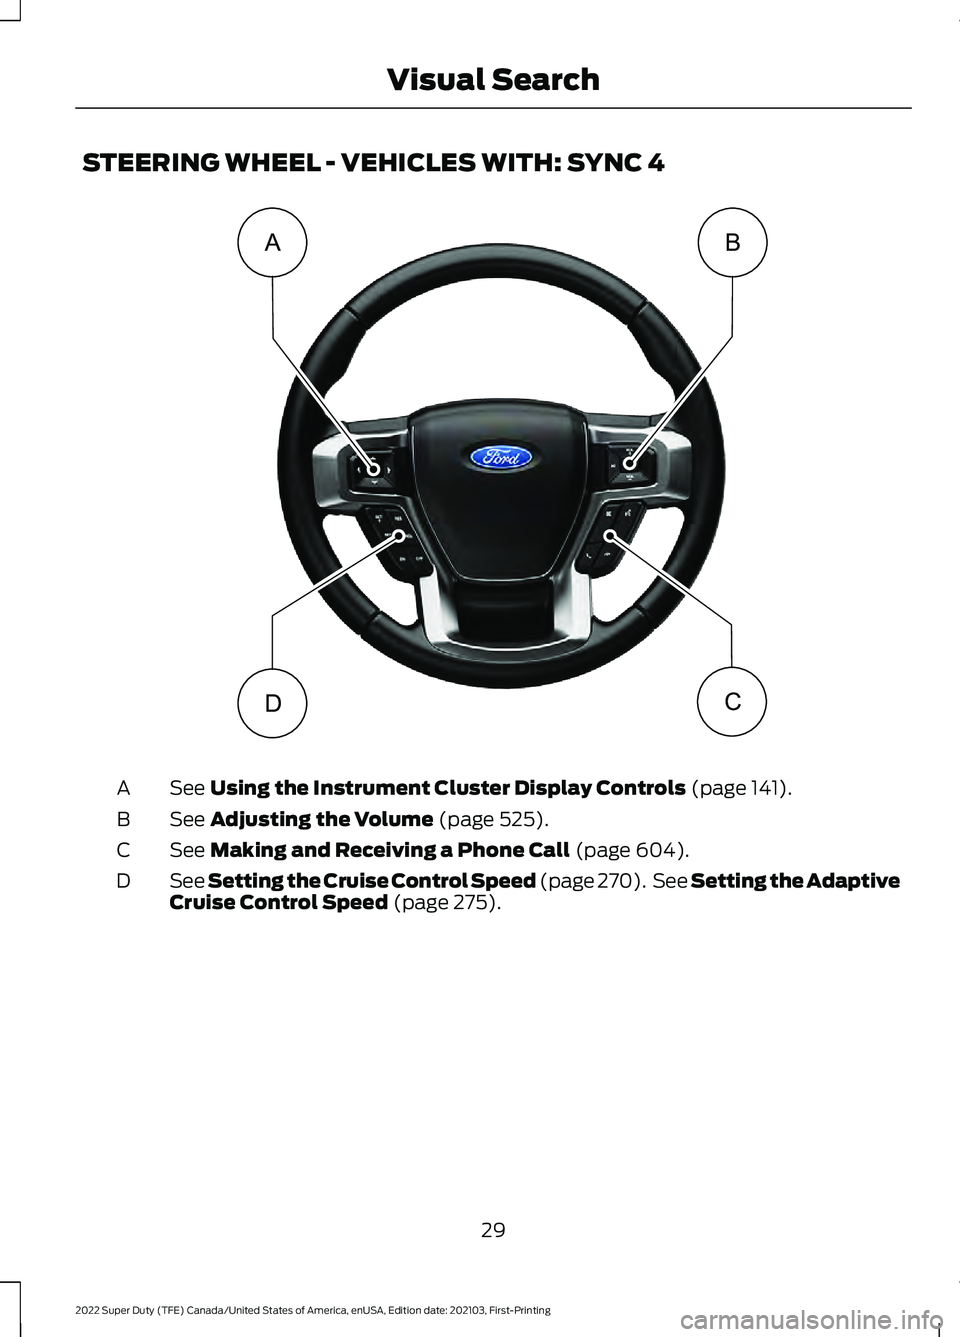 FORD F-450 2022  Owners Manual STEERING WHEEL - VEHICLES WITH: SYNC 4
See Using the Instrument Cluster Display Controls (page 141).
A
See 
Adjusting the Volume (page 525).
B
See 
Making and Receiving a Phone Call (page 604).
C
See 